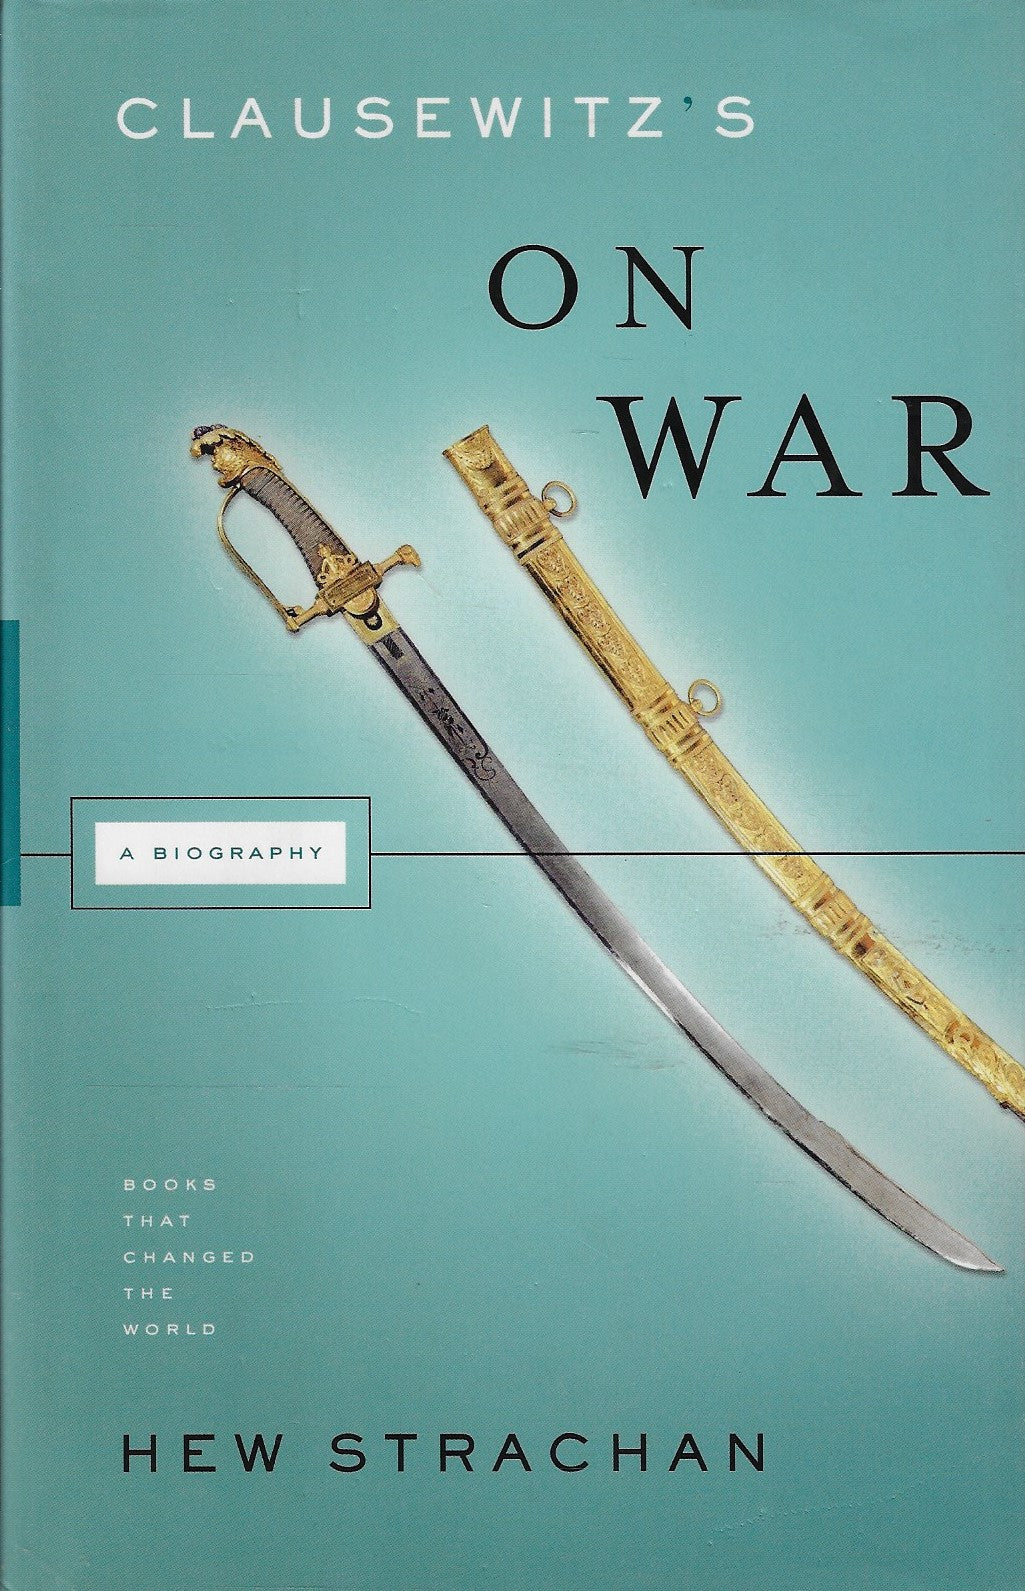 Clausewitz's on war - a biography